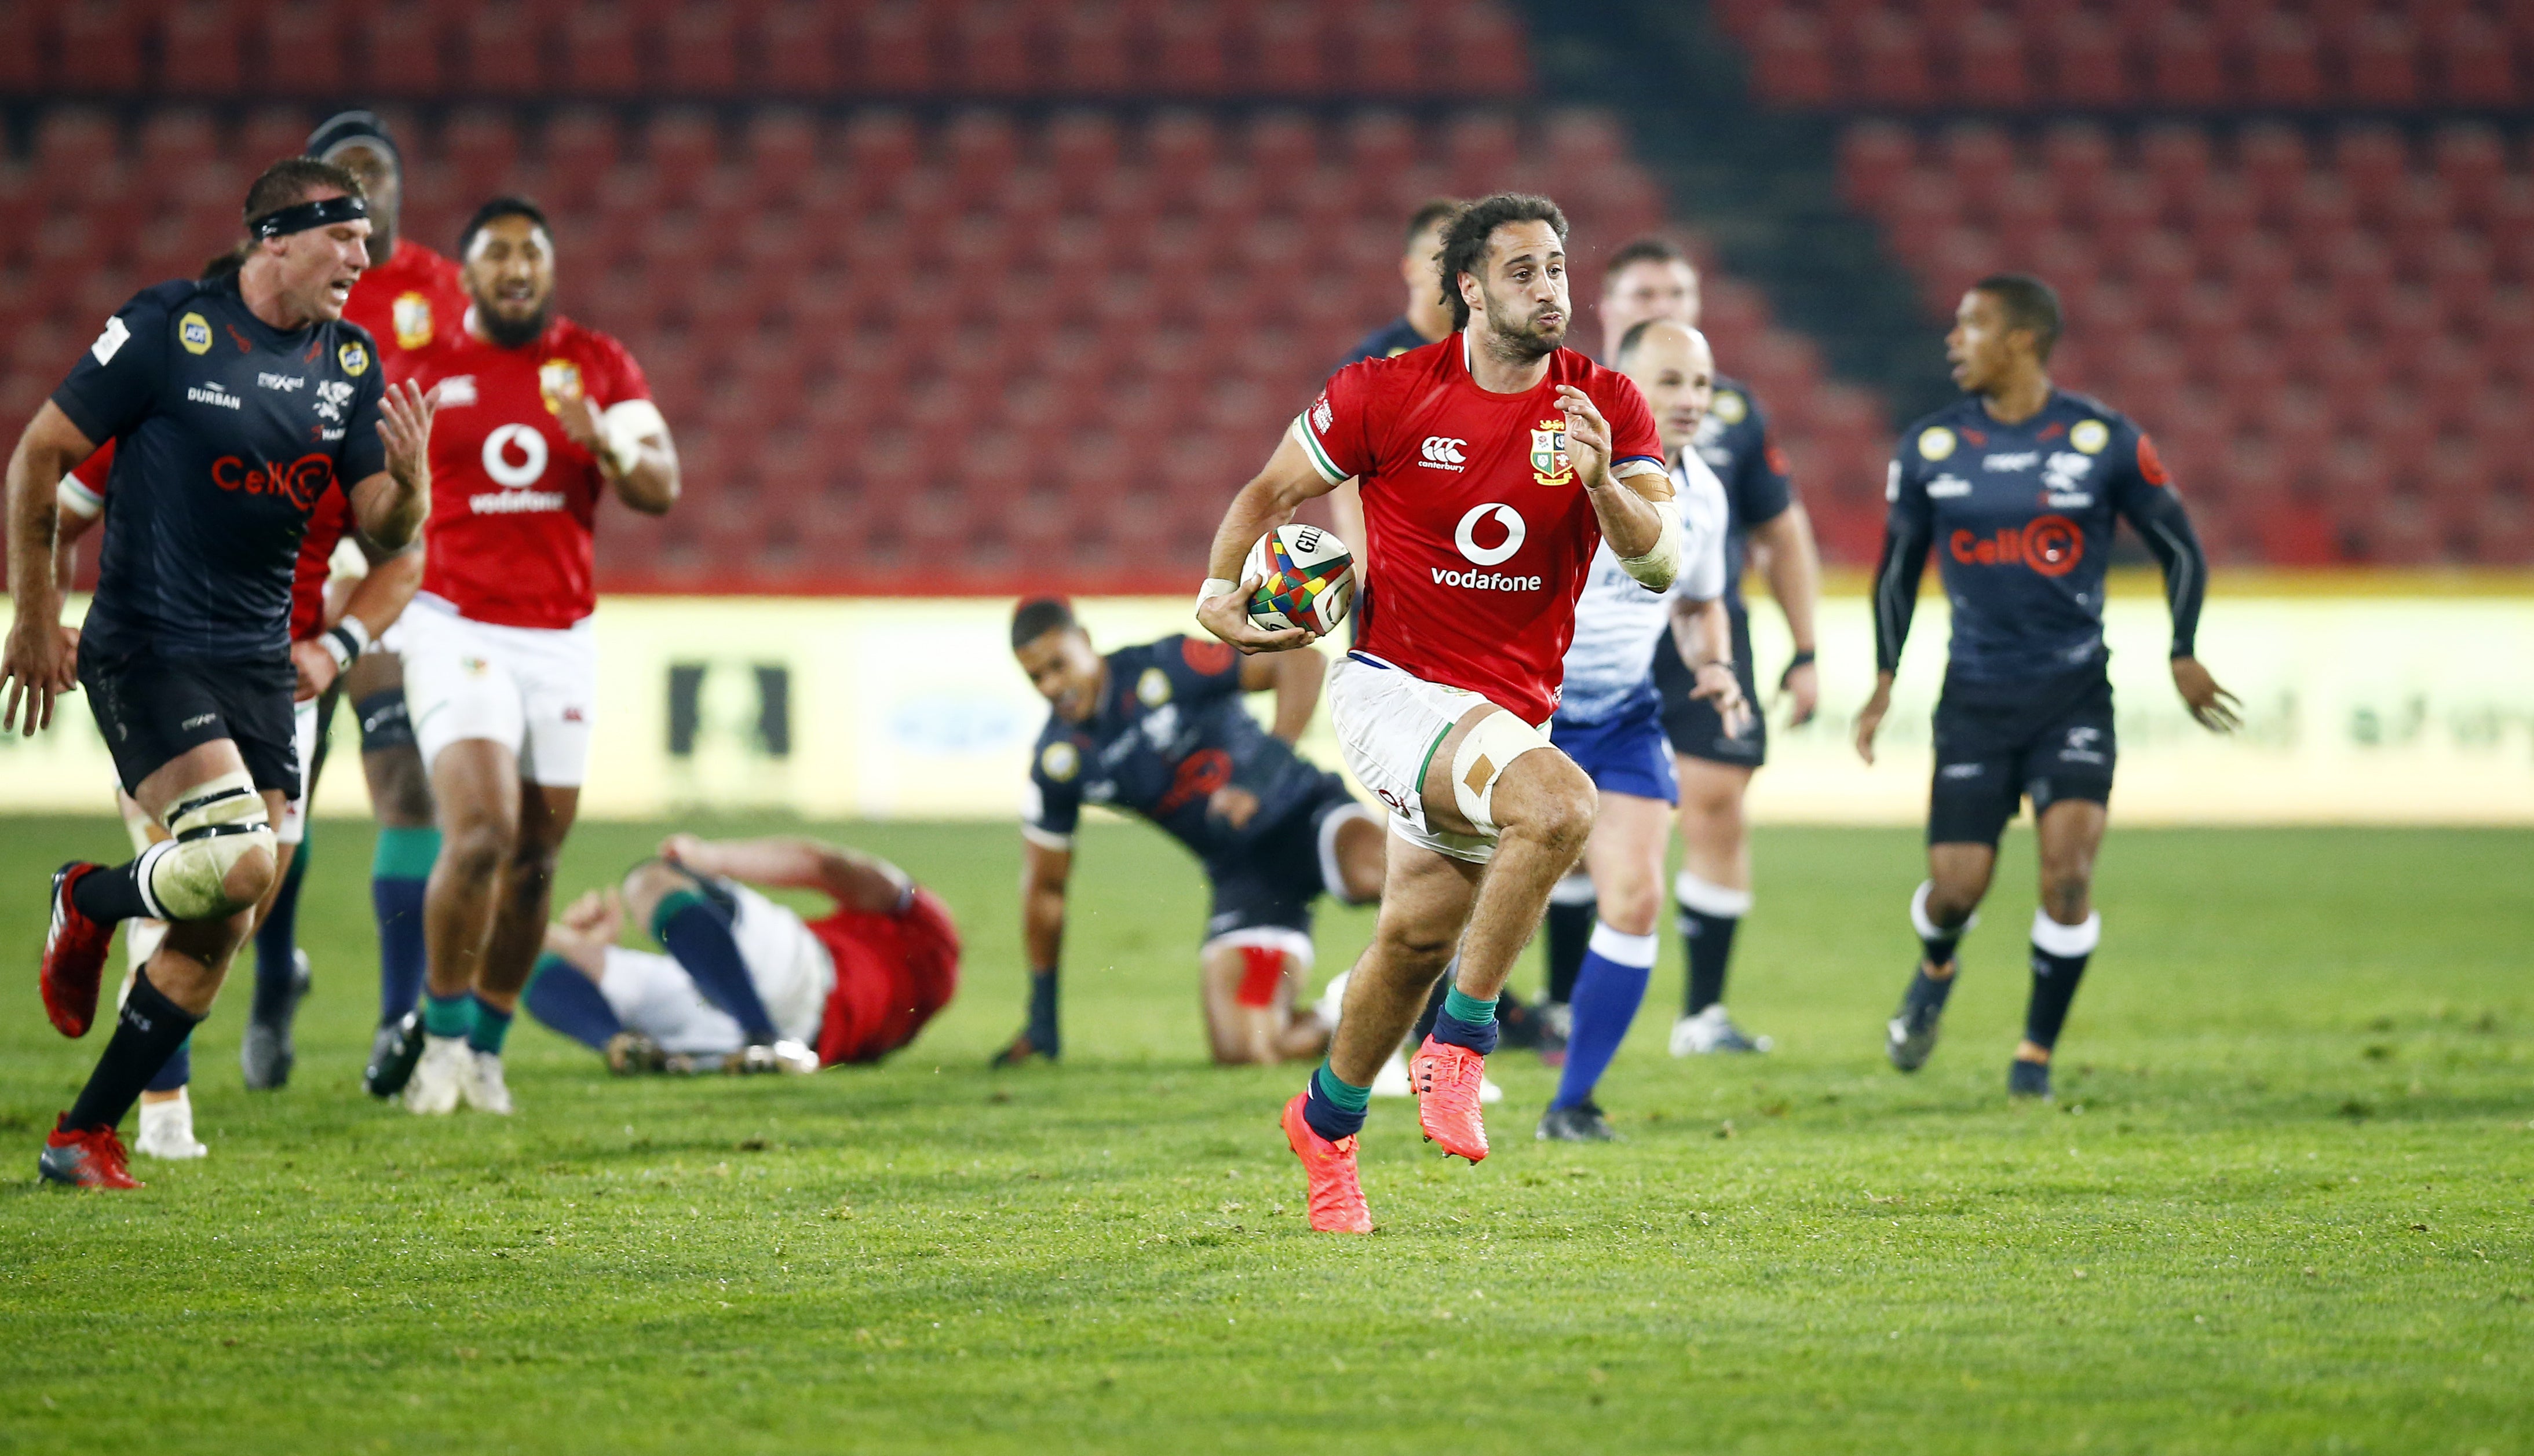 The Lions dismantled the Sharks on Wednesday and are now going to play them for a second time